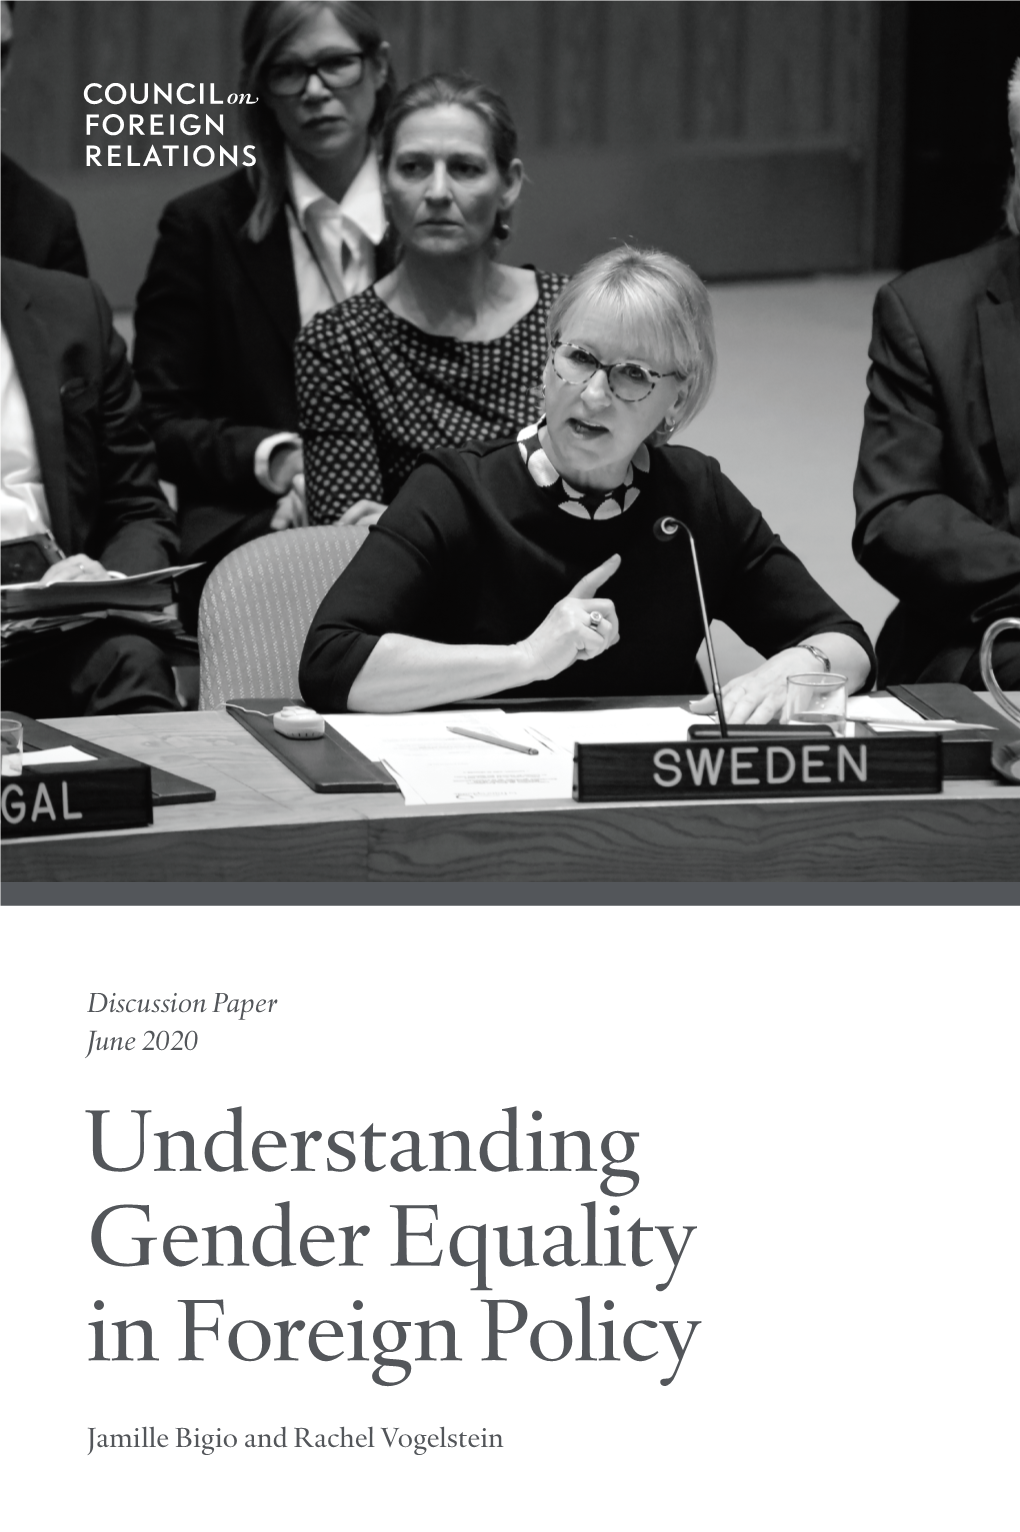 Understanding Gender Equality in Foreign Policy What the United States Can Do